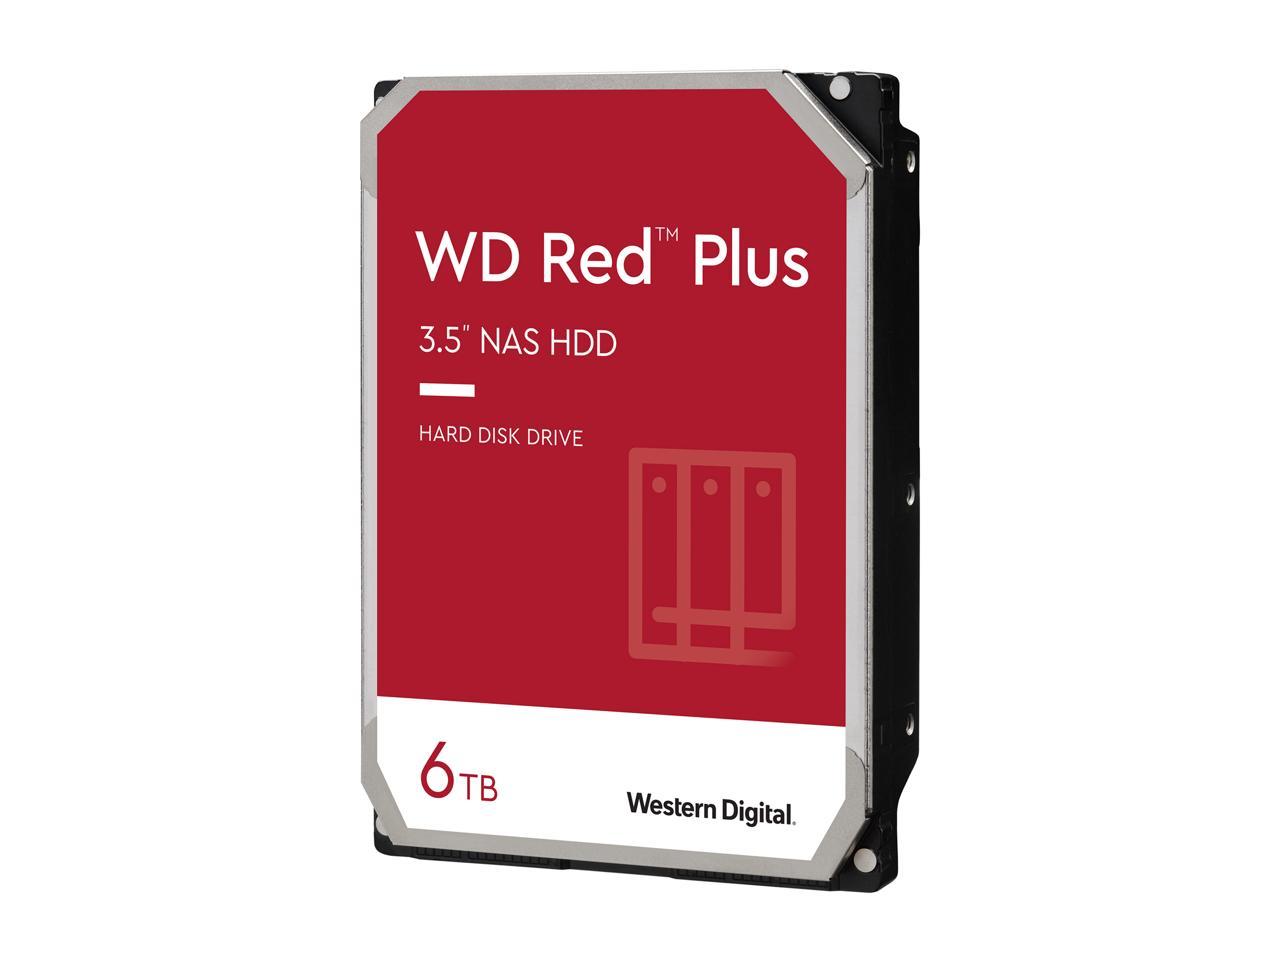 Wd Red Plus 6Tb Nas Hard Disk Drive - 5400 Rpm Class Sata 6Gb/S, Cmr, 128Mb Cache, 3.5 Inch - Wd60Efzx